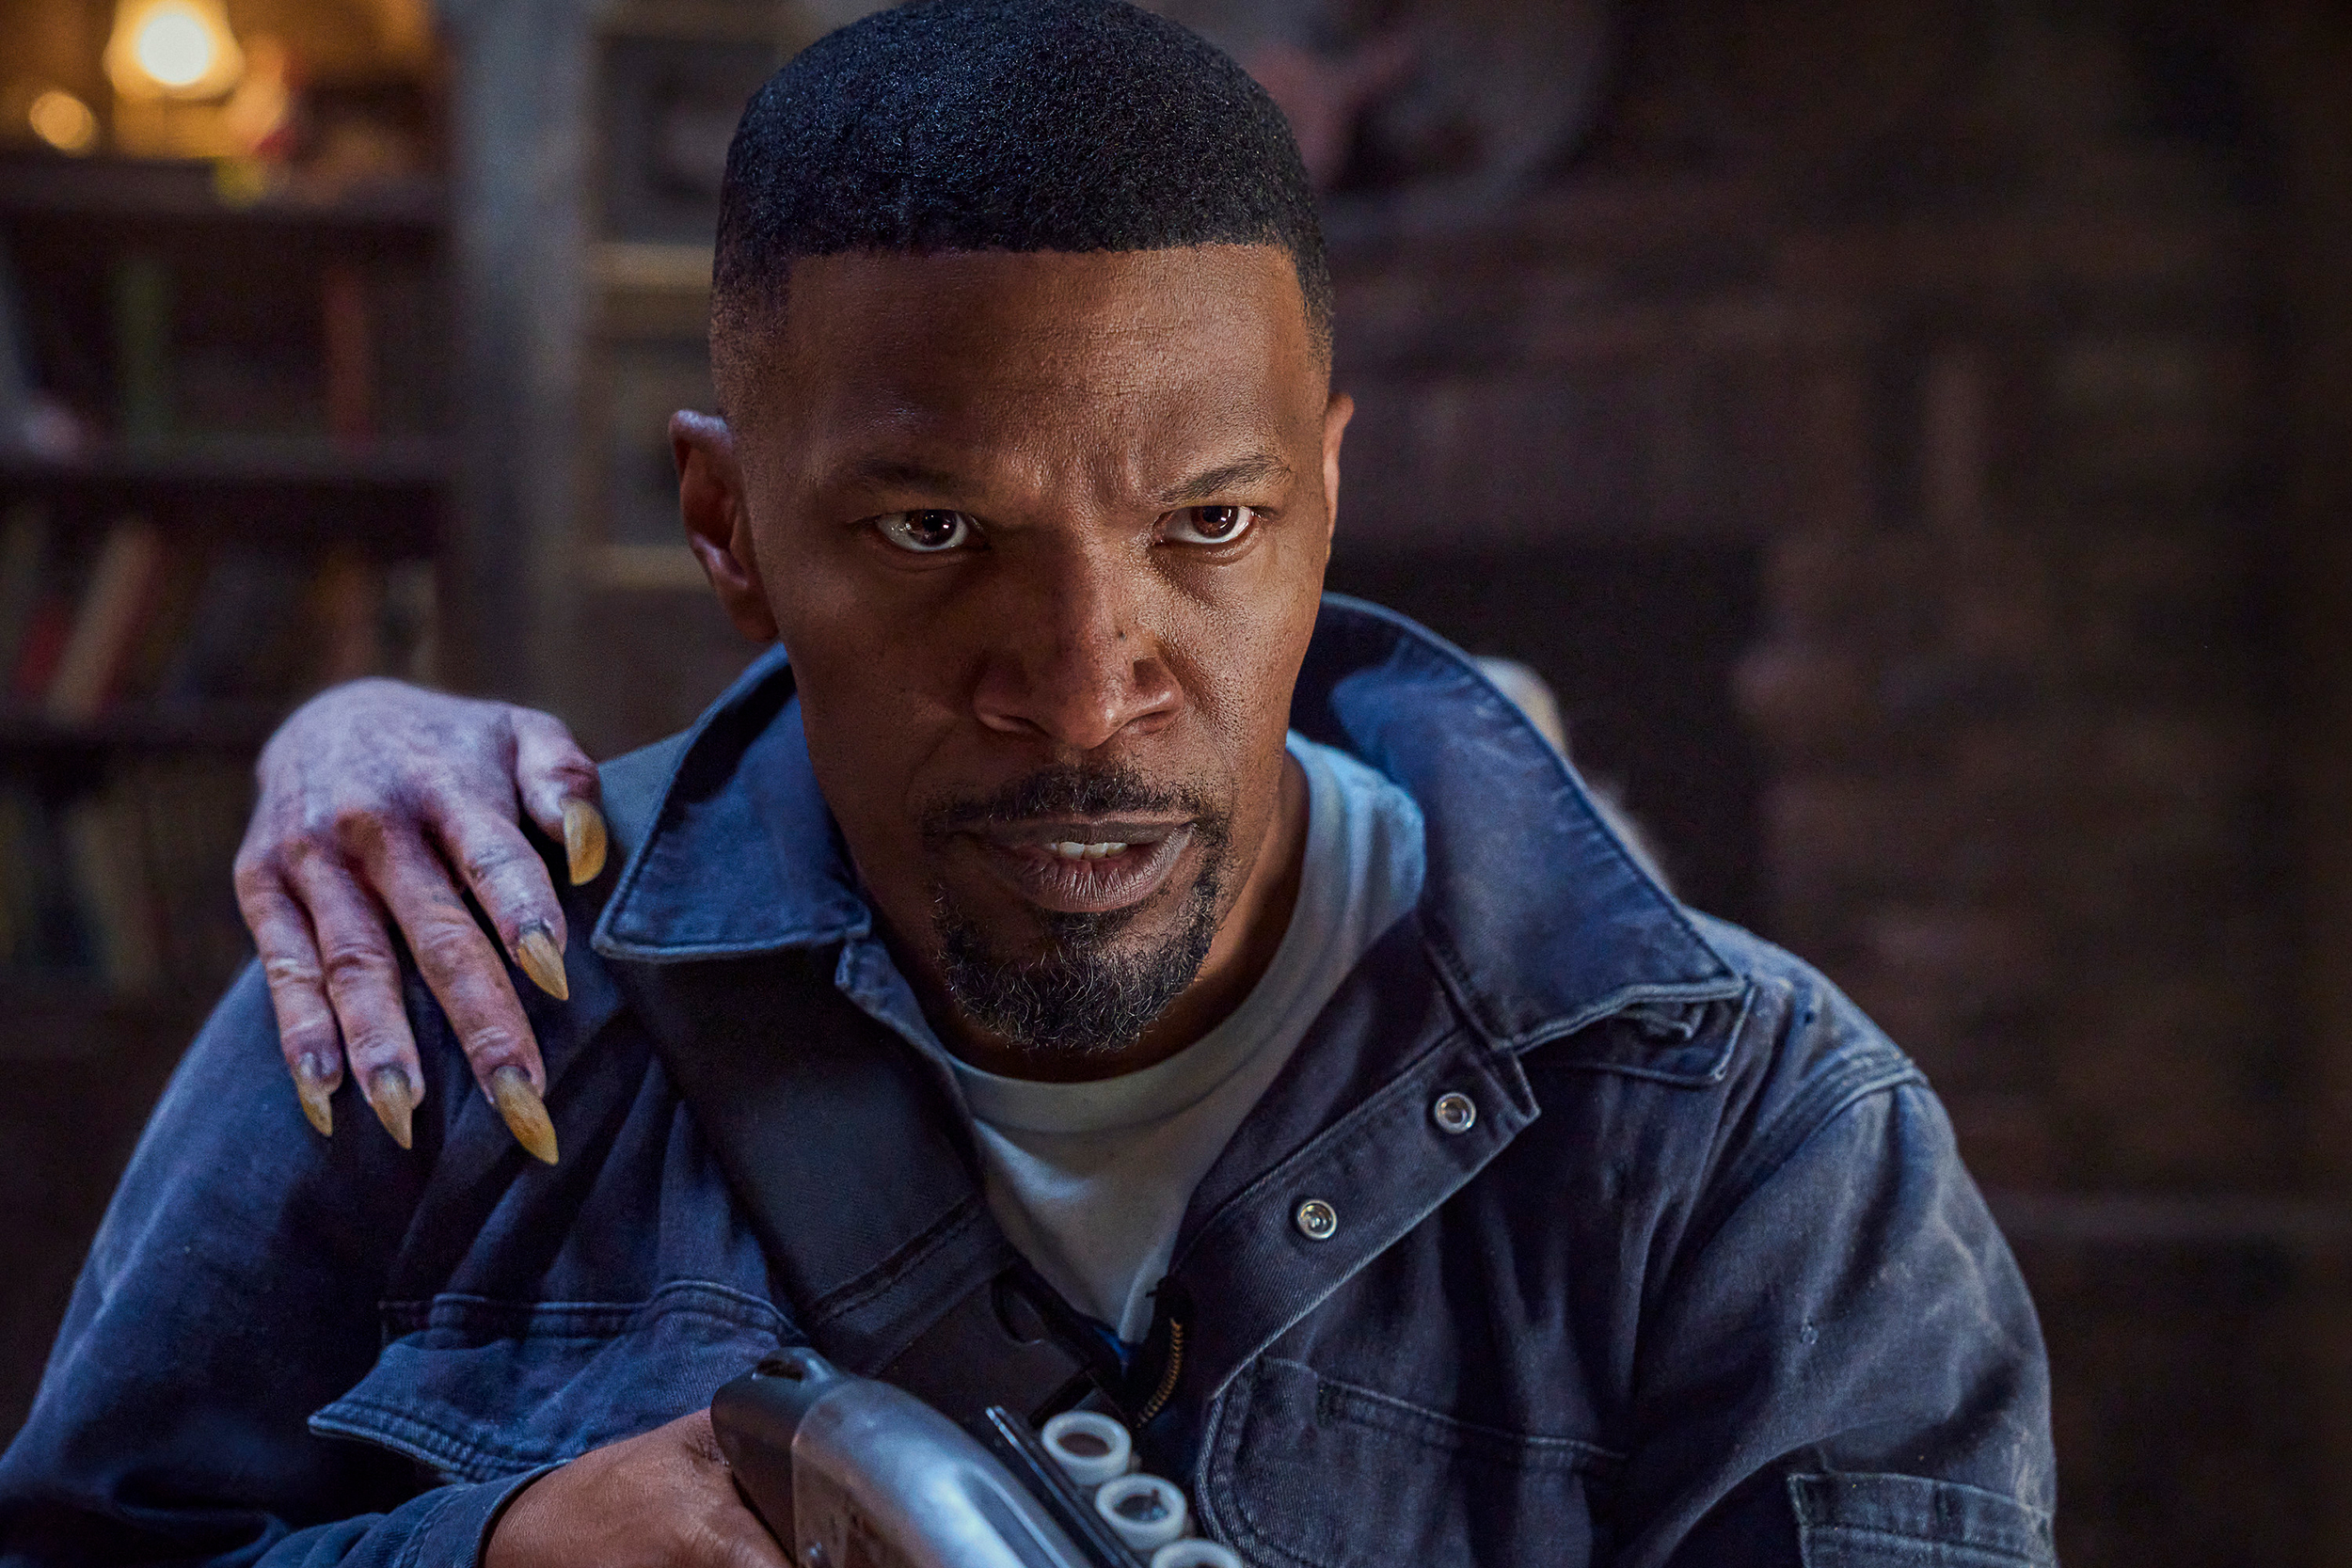 Jamie Foxx rises again as dad, the vampire hunter, in Netflix’s dreary ‘Day Shift’